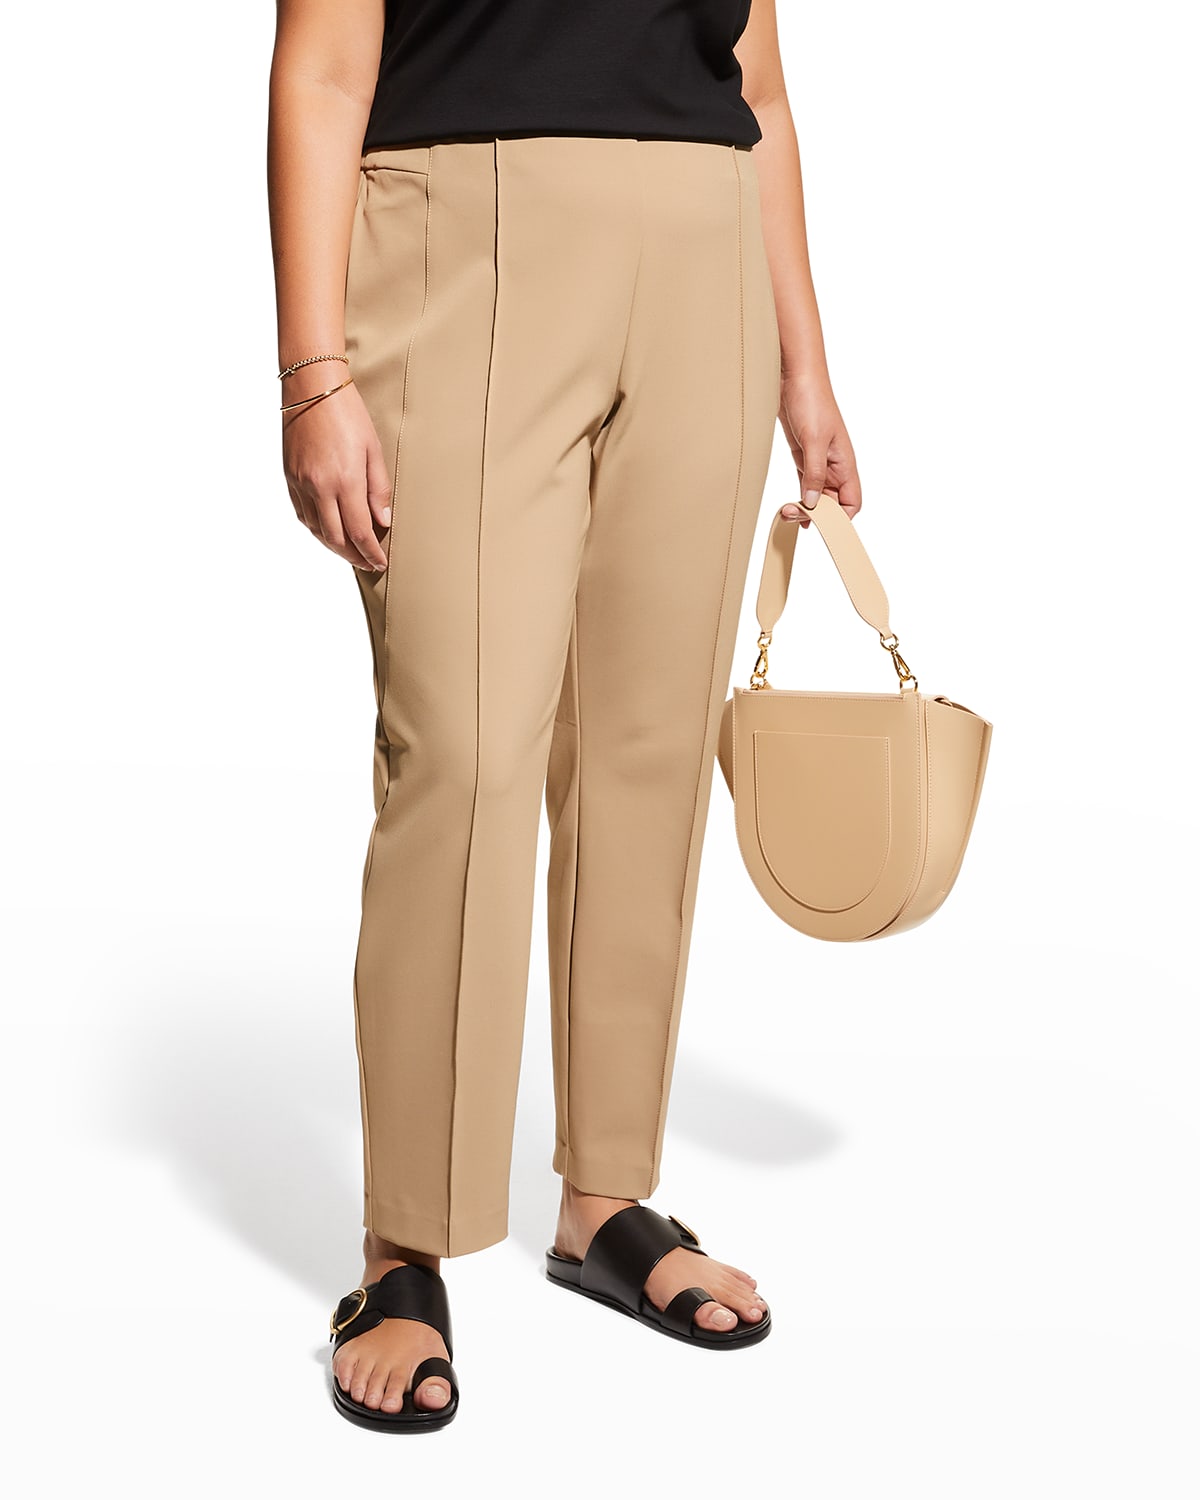 Gramercy Acclaimed-Stretch Pants